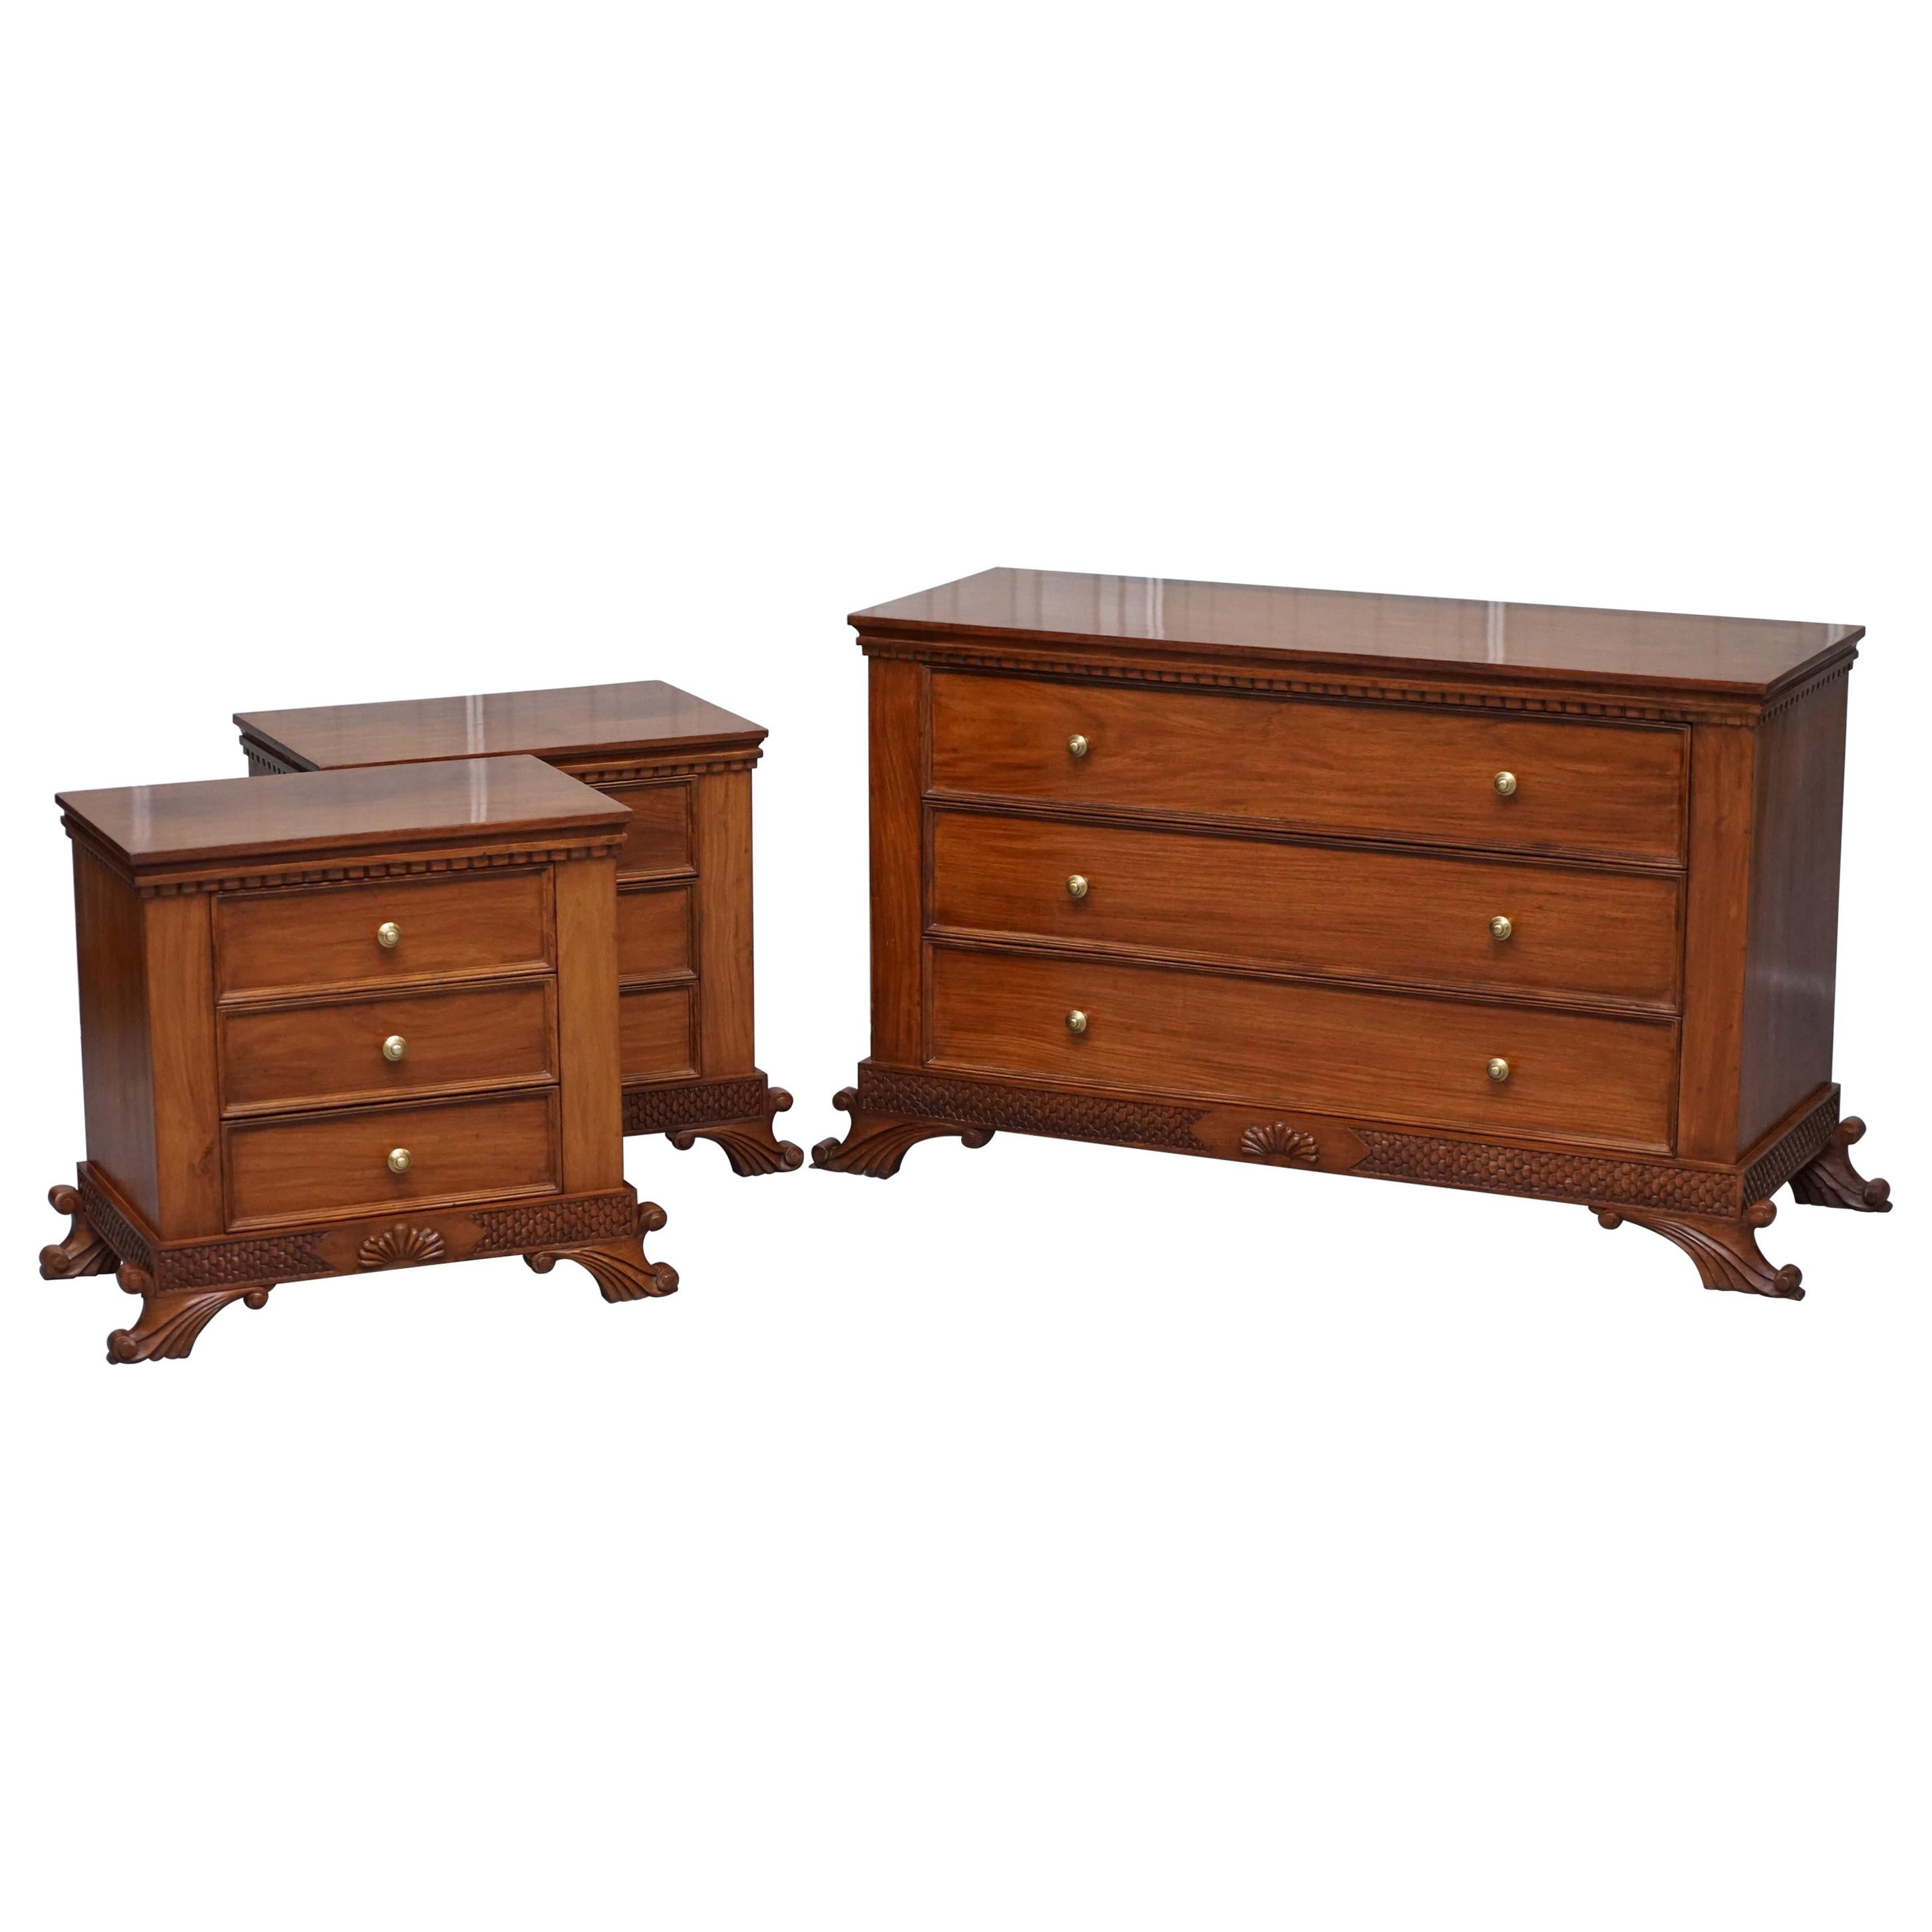 Stunning Suite of Panelled Hardwood Chests of Drawers Ornately Carved Bases For Sale